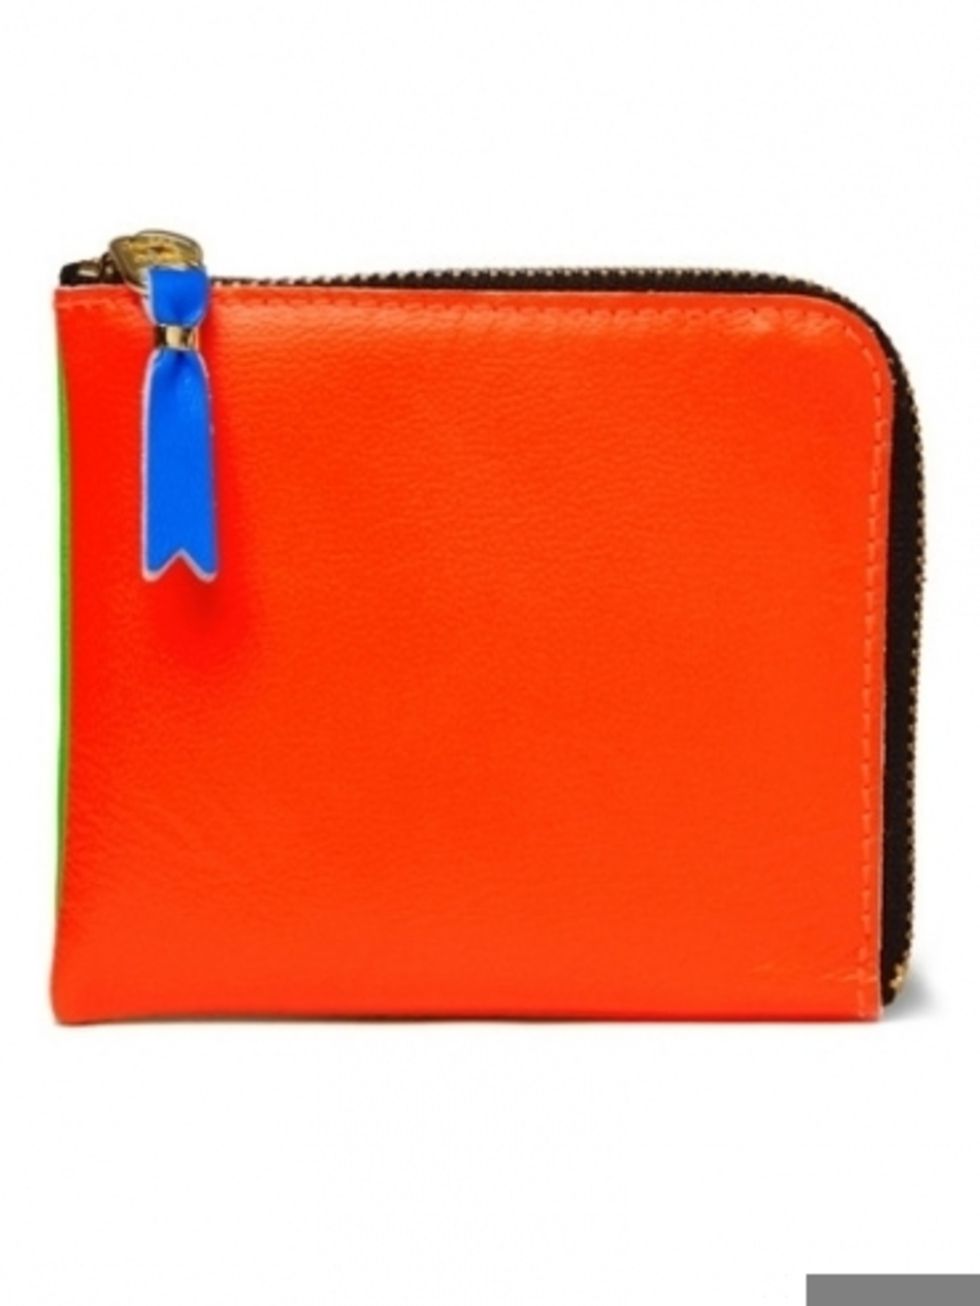 Red, Textile, Orange, Bag, Electric blue, Rectangle, Wallet, Leather, Coquelicot, Everyday carry, 